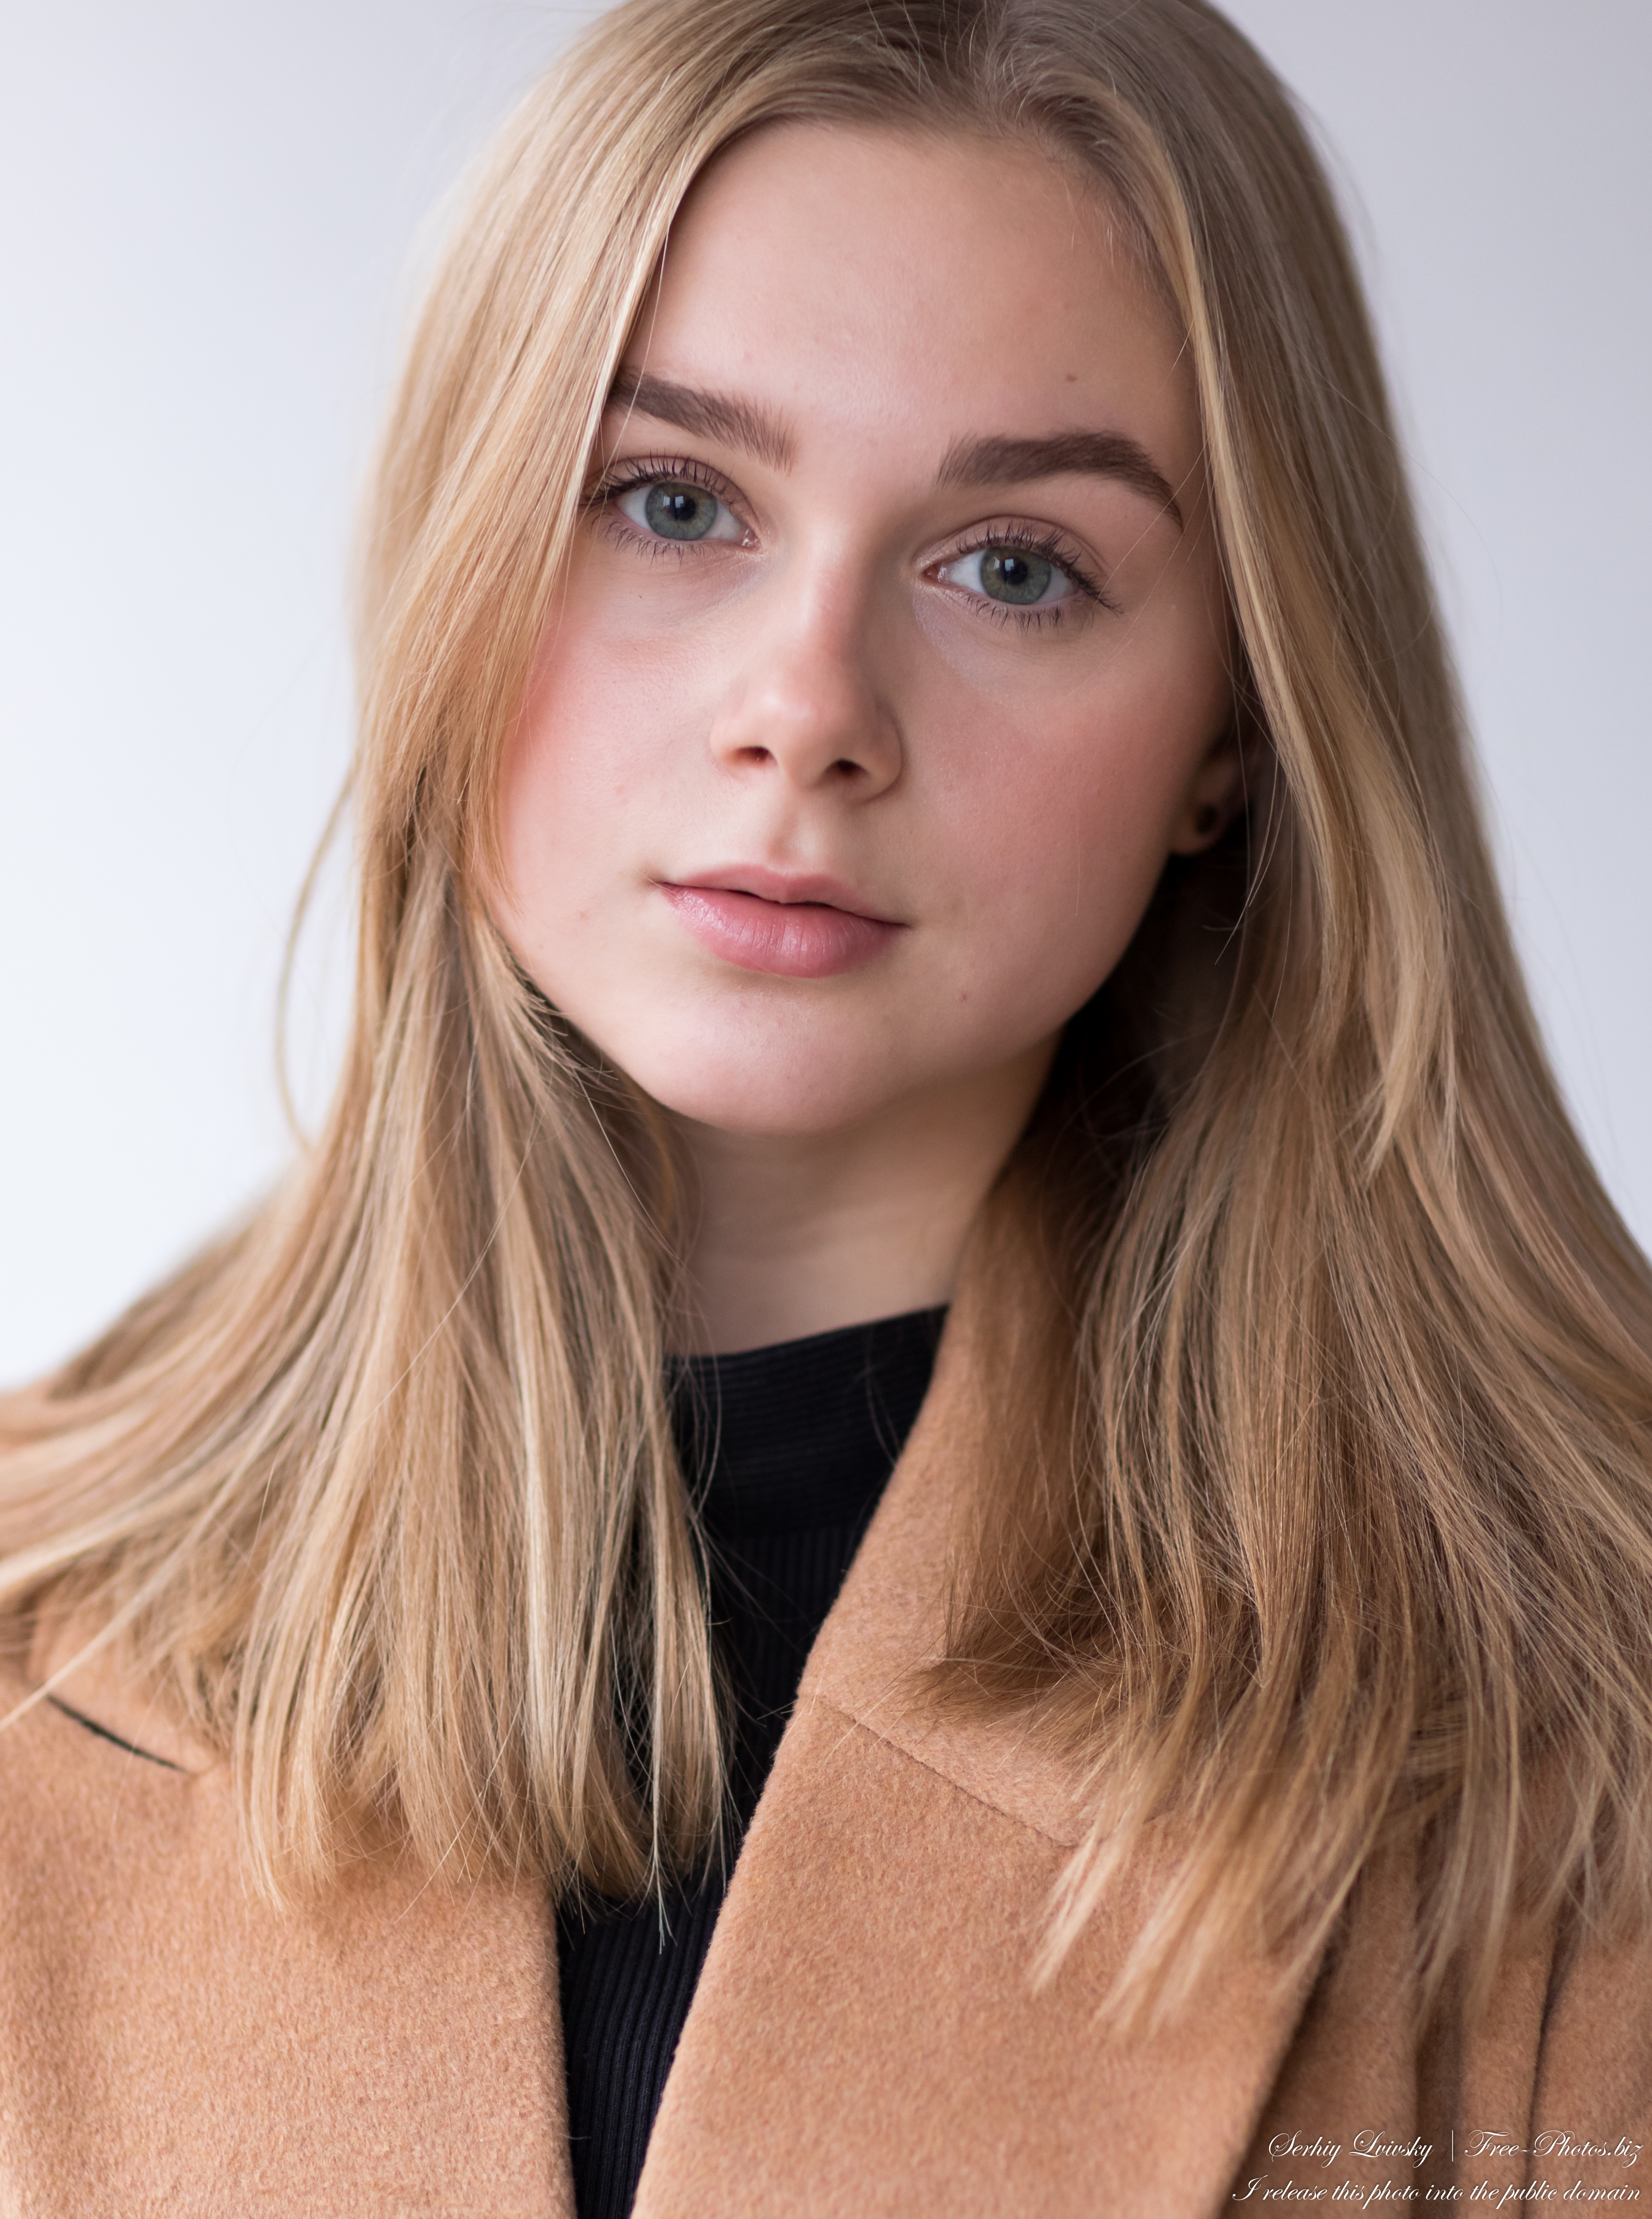 Emilia - a 15-year-old natural blonde Catholic girl photographed in November 2020 by Serhiy Lvivsky, picture 4